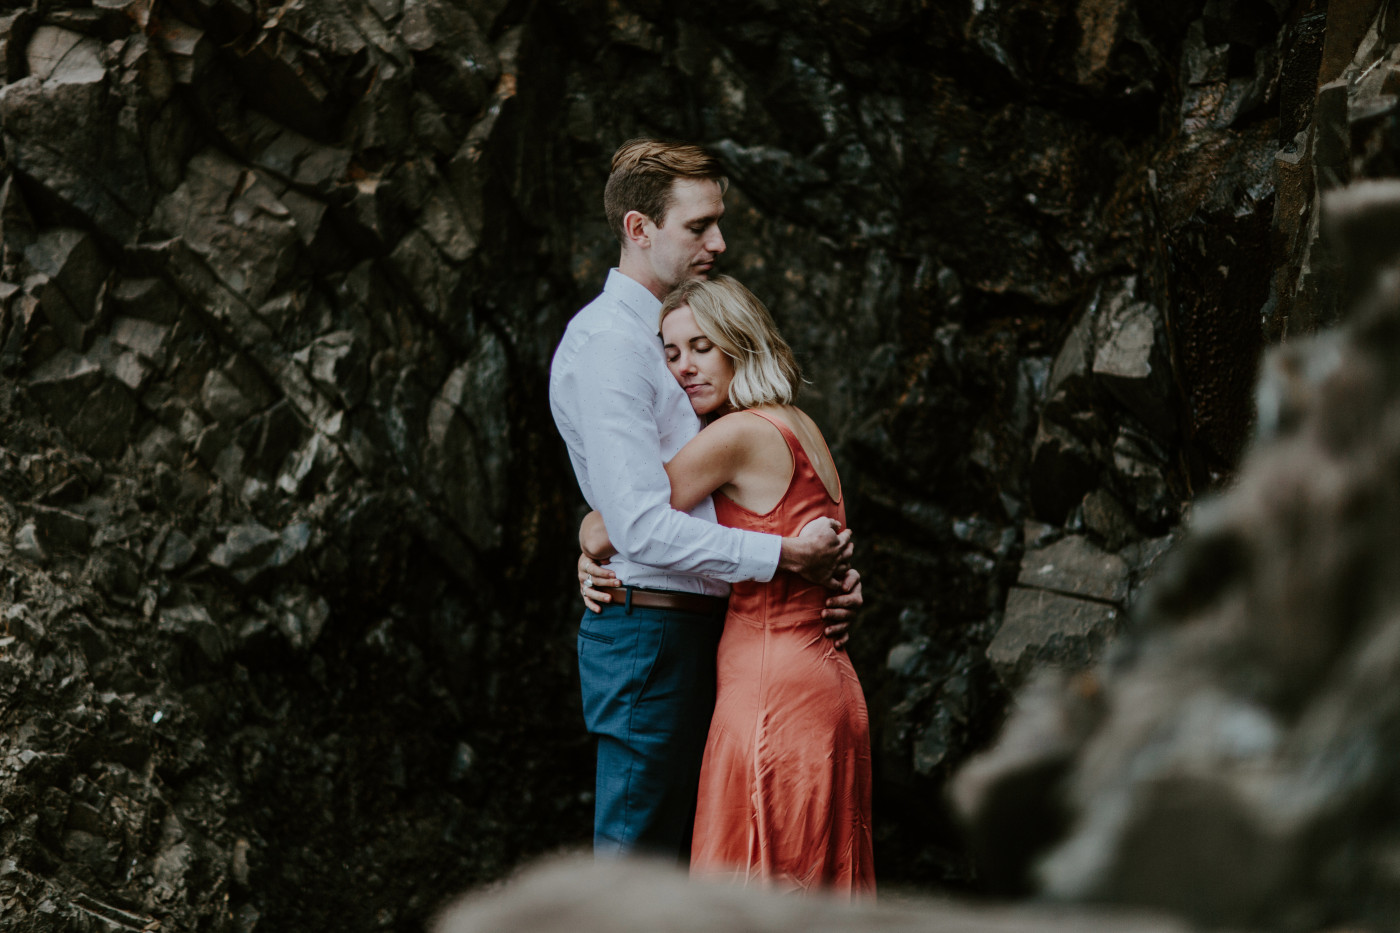 Chelsey and Billy share a hug. Elopement wedding photography at Cannon Beach by Sienna Plus Josh.